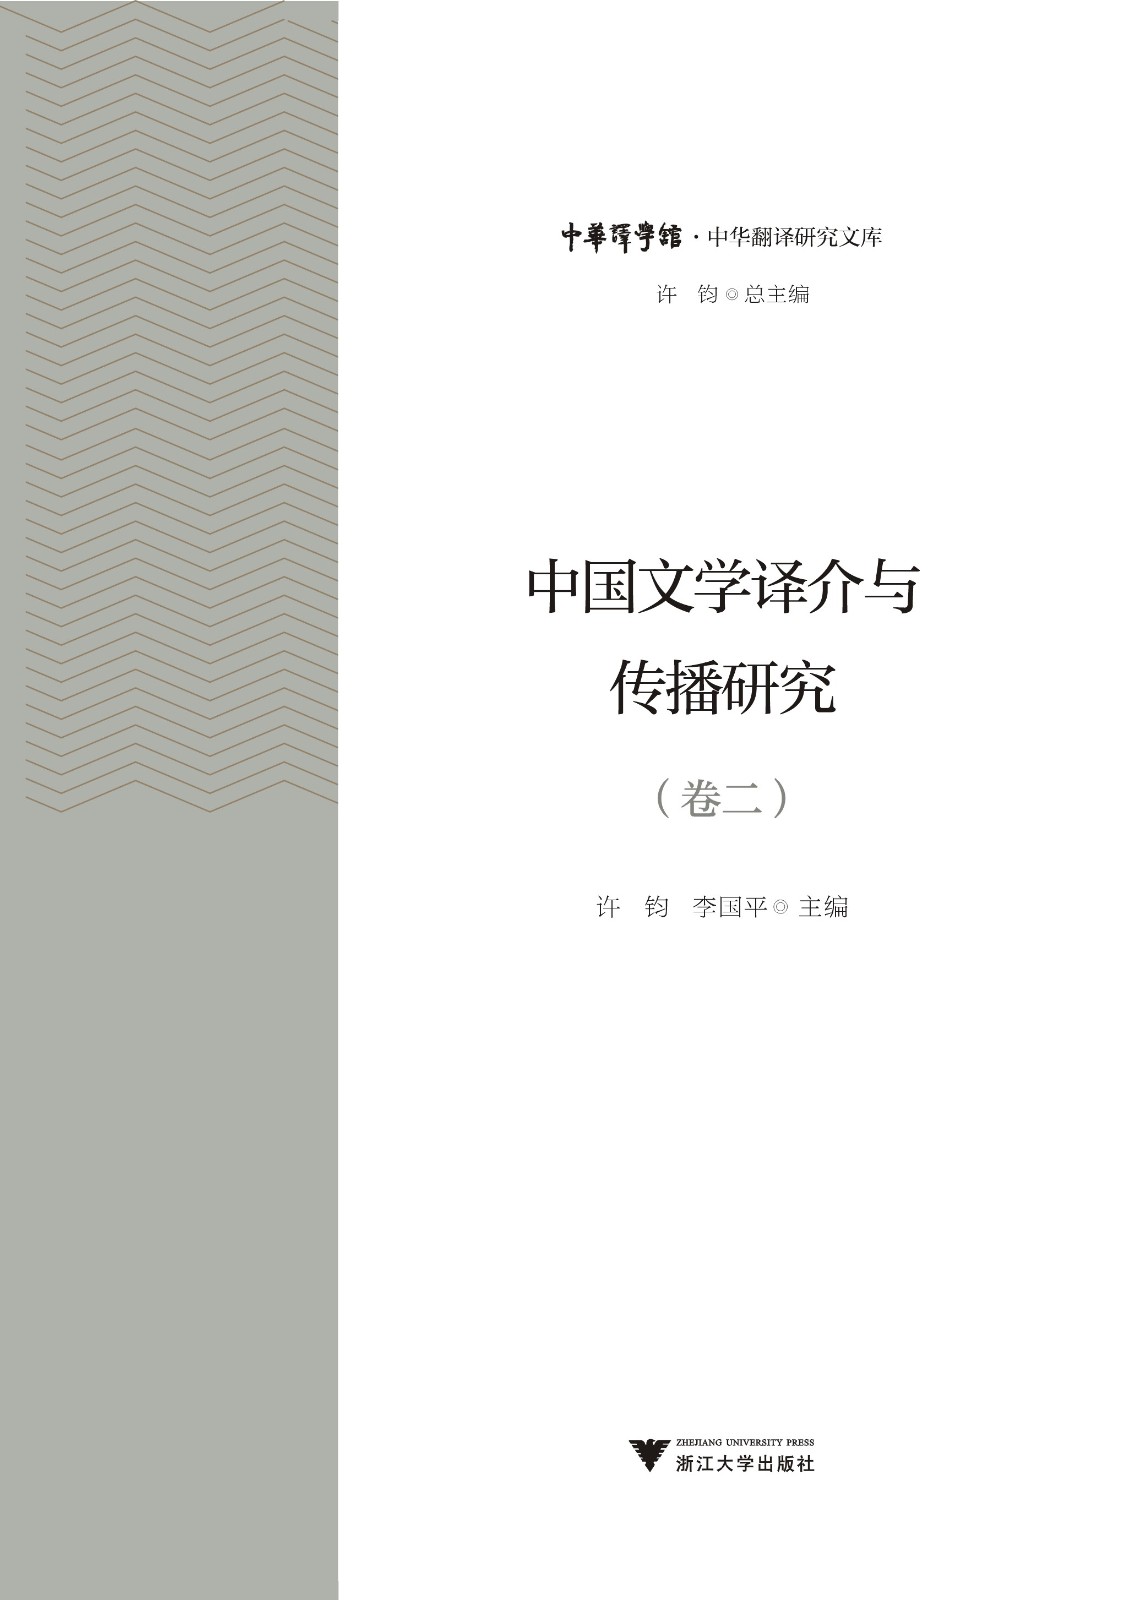 Translation and Promotion of Chinese Literature (Volume II)